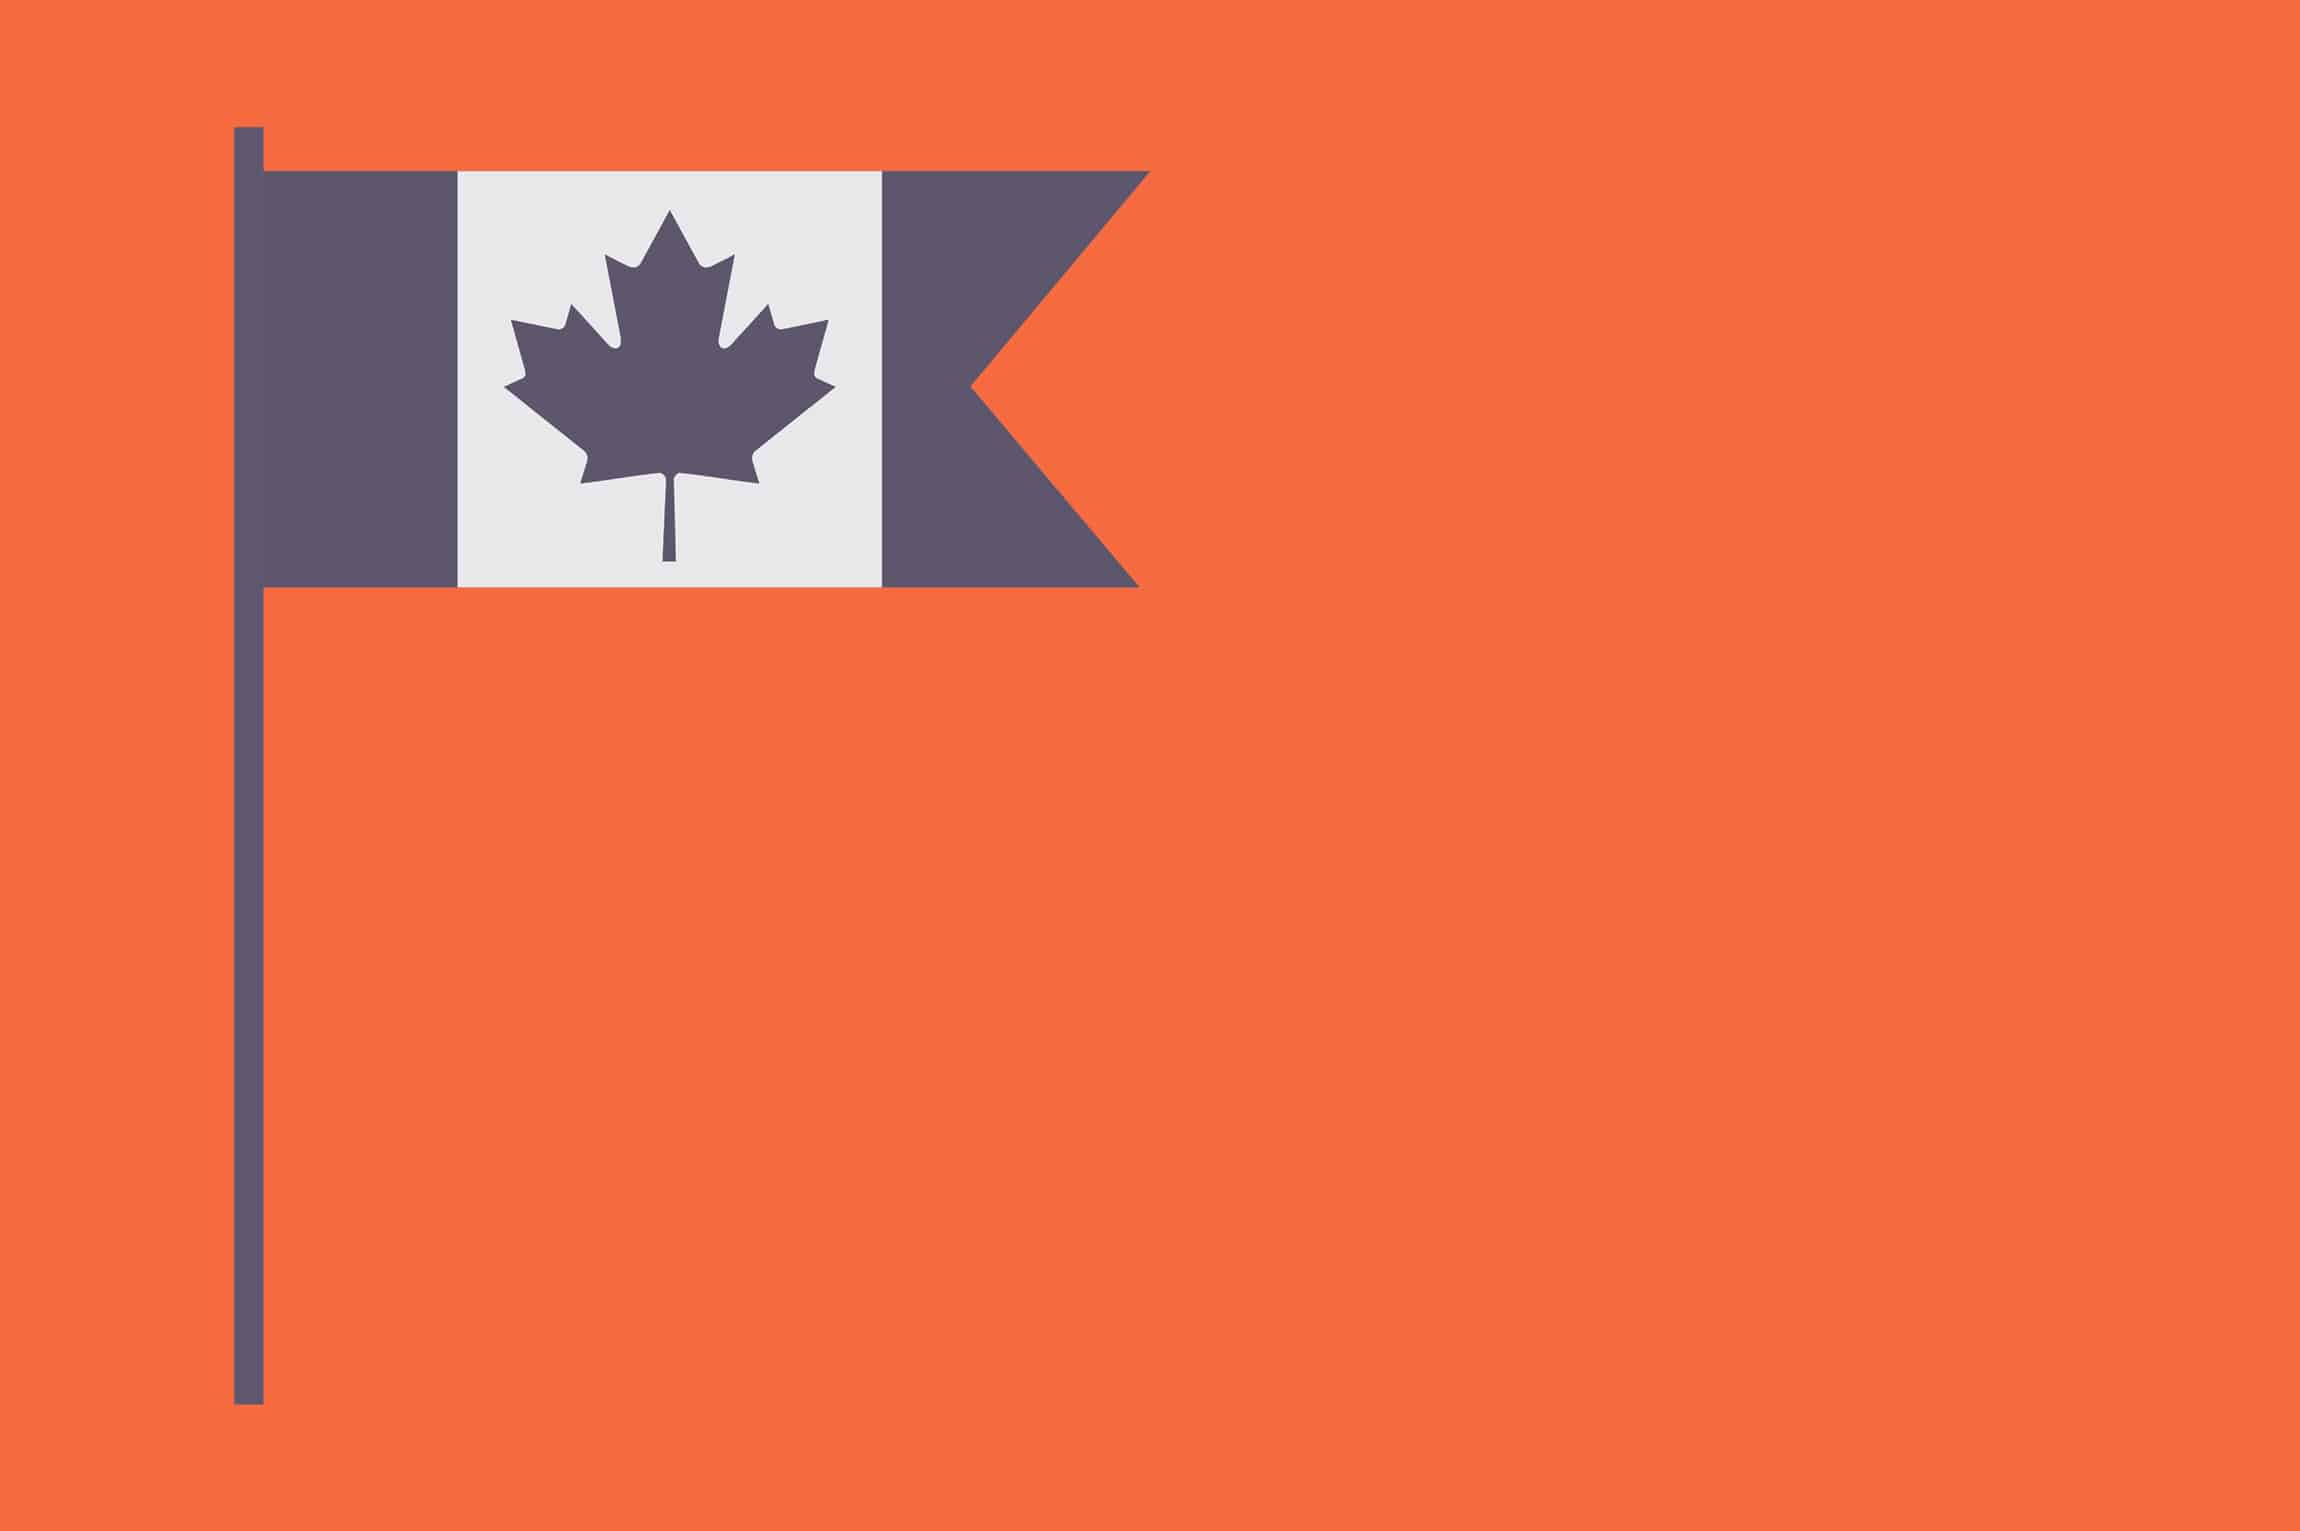 The Canadian flag, in an orange background